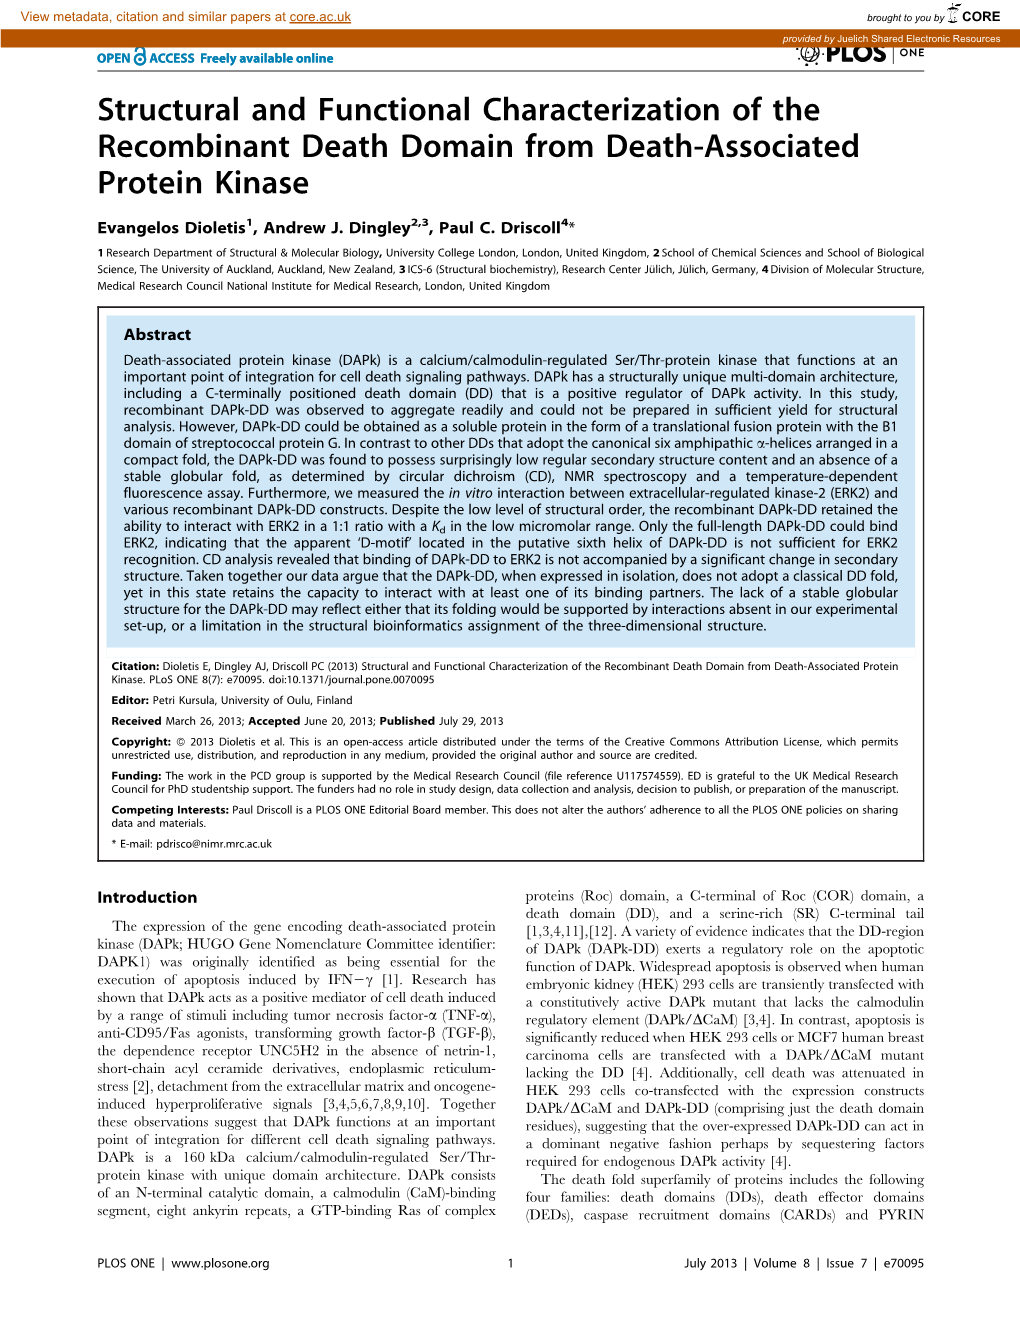 Structural and Functional Characterization of the Recombinant Death Domain from Death-Associated Protein Kinase